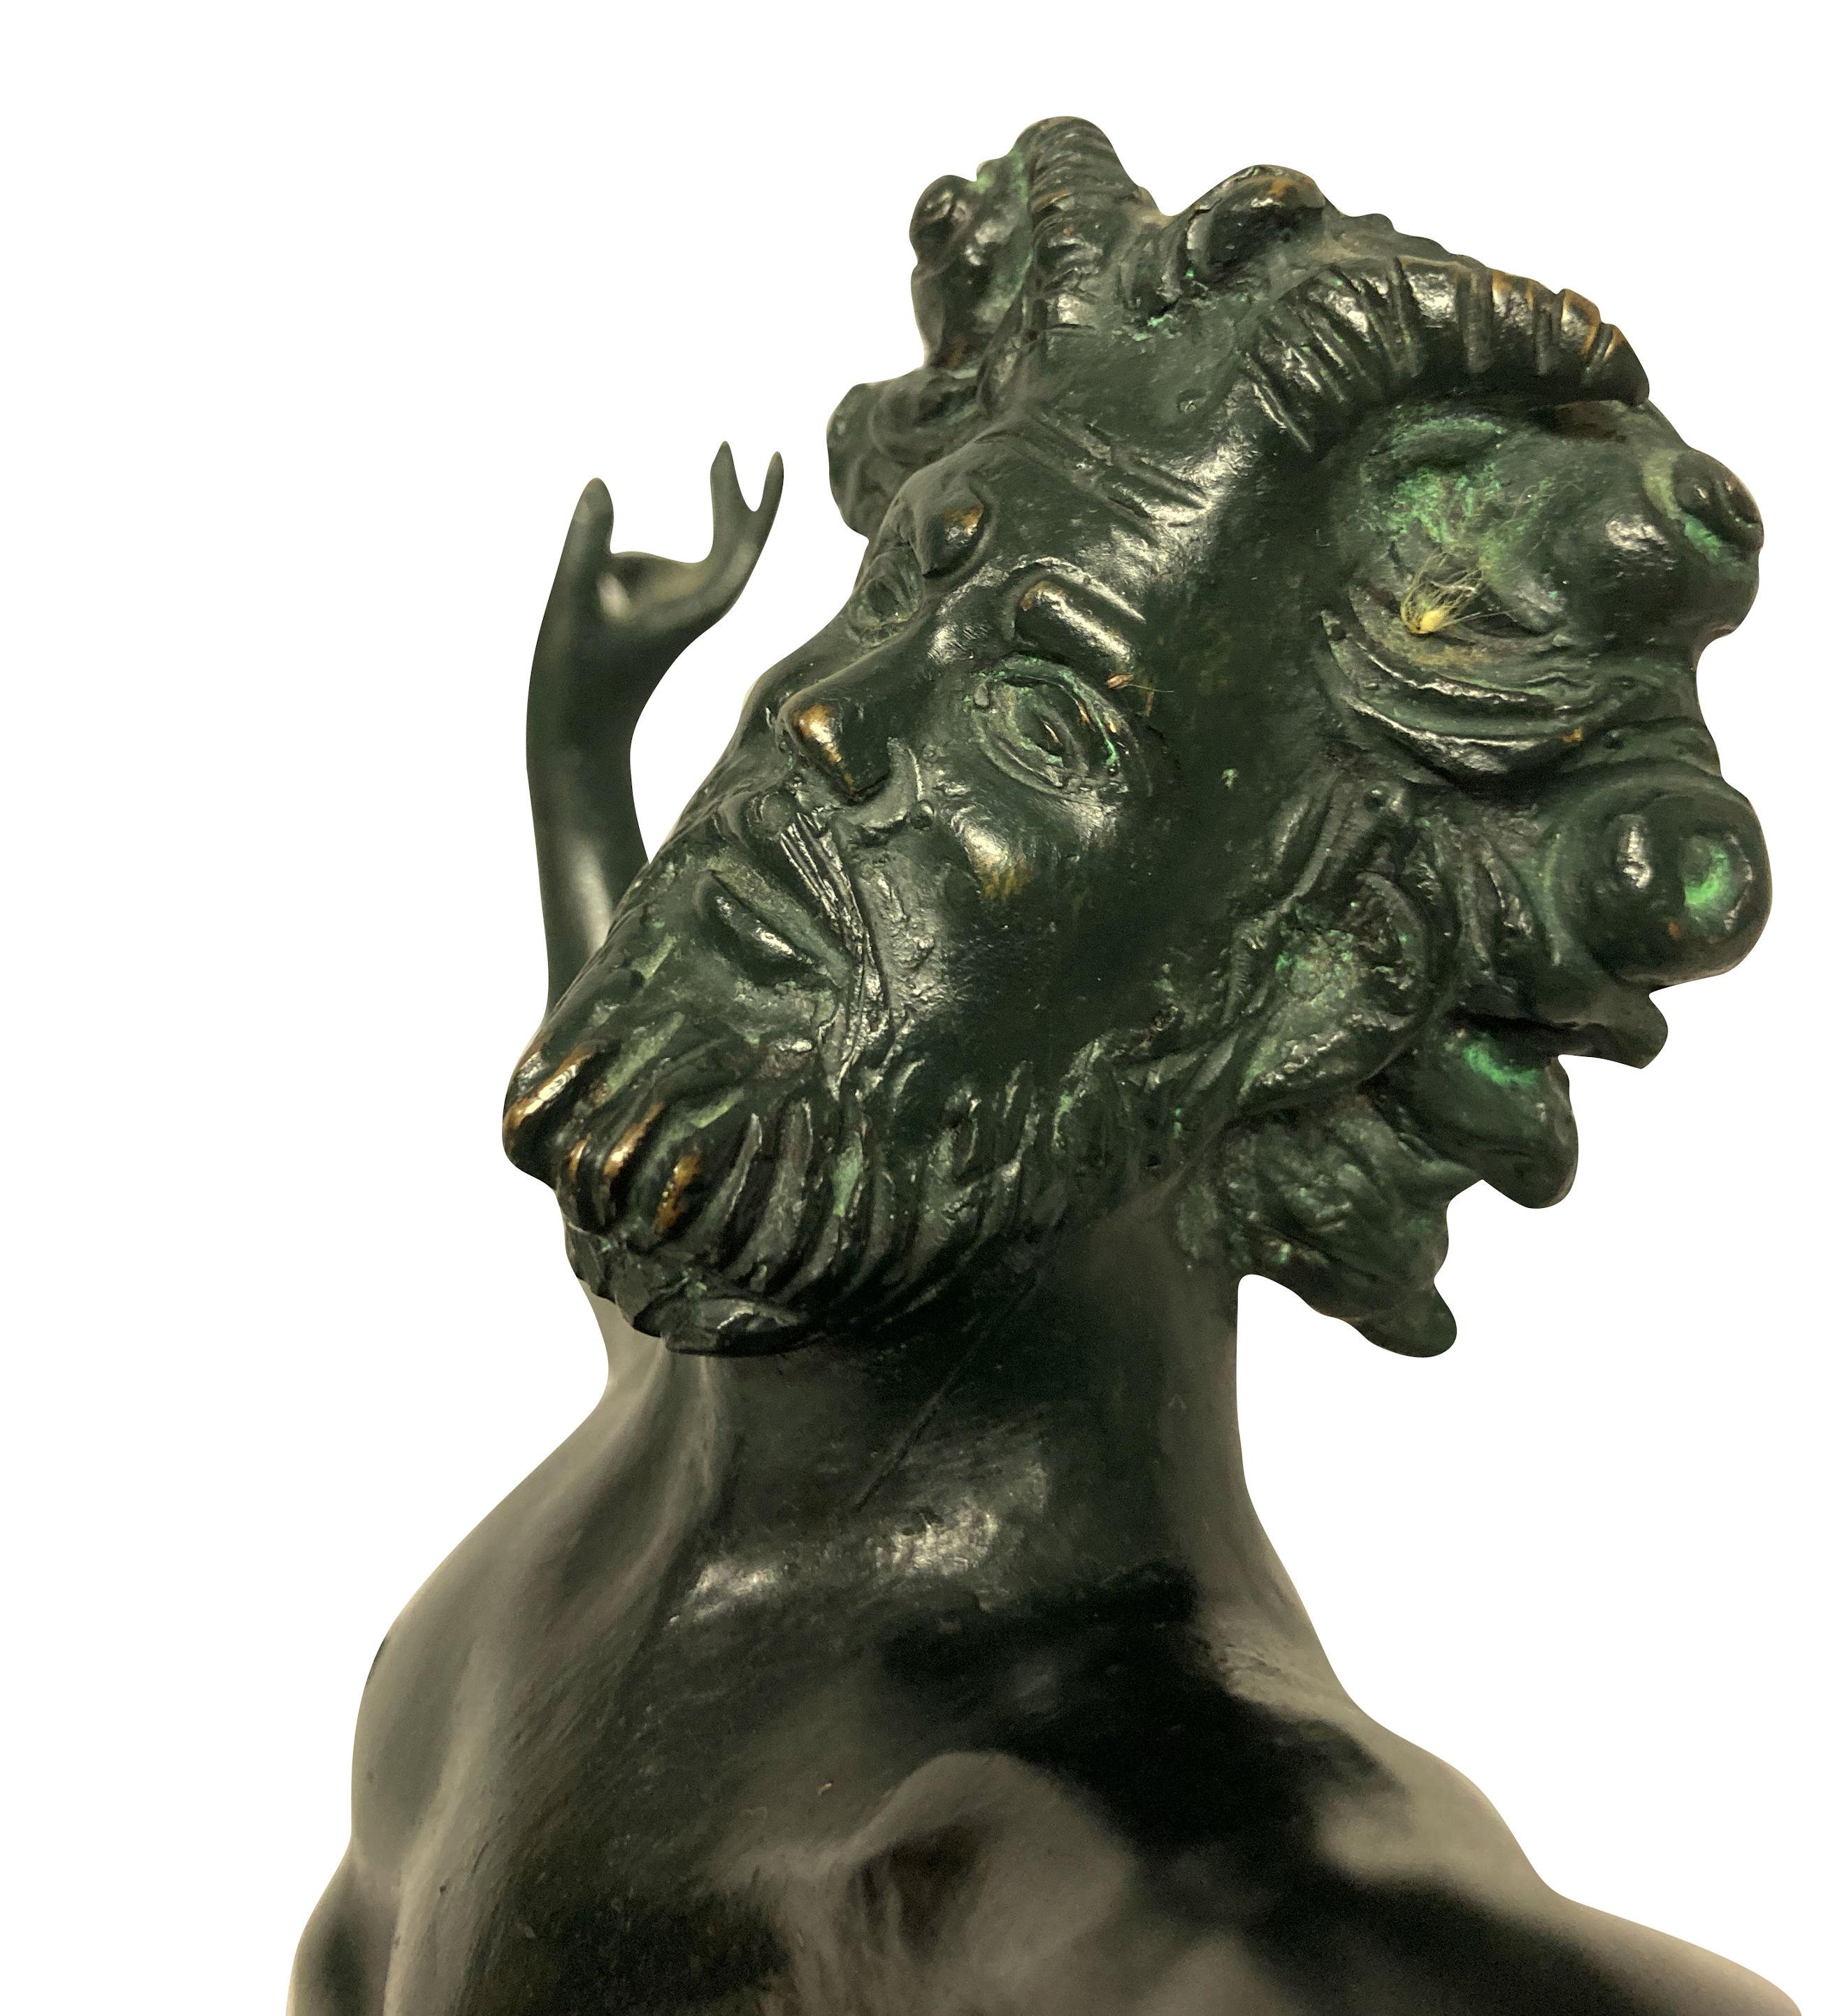 An English green patinated bronze statue of the dancing faun. This classic sculpture of the dancing faun was originally found in Pompeii after it’s excavation during the XVIII century and became copied for The Grand Tour market.